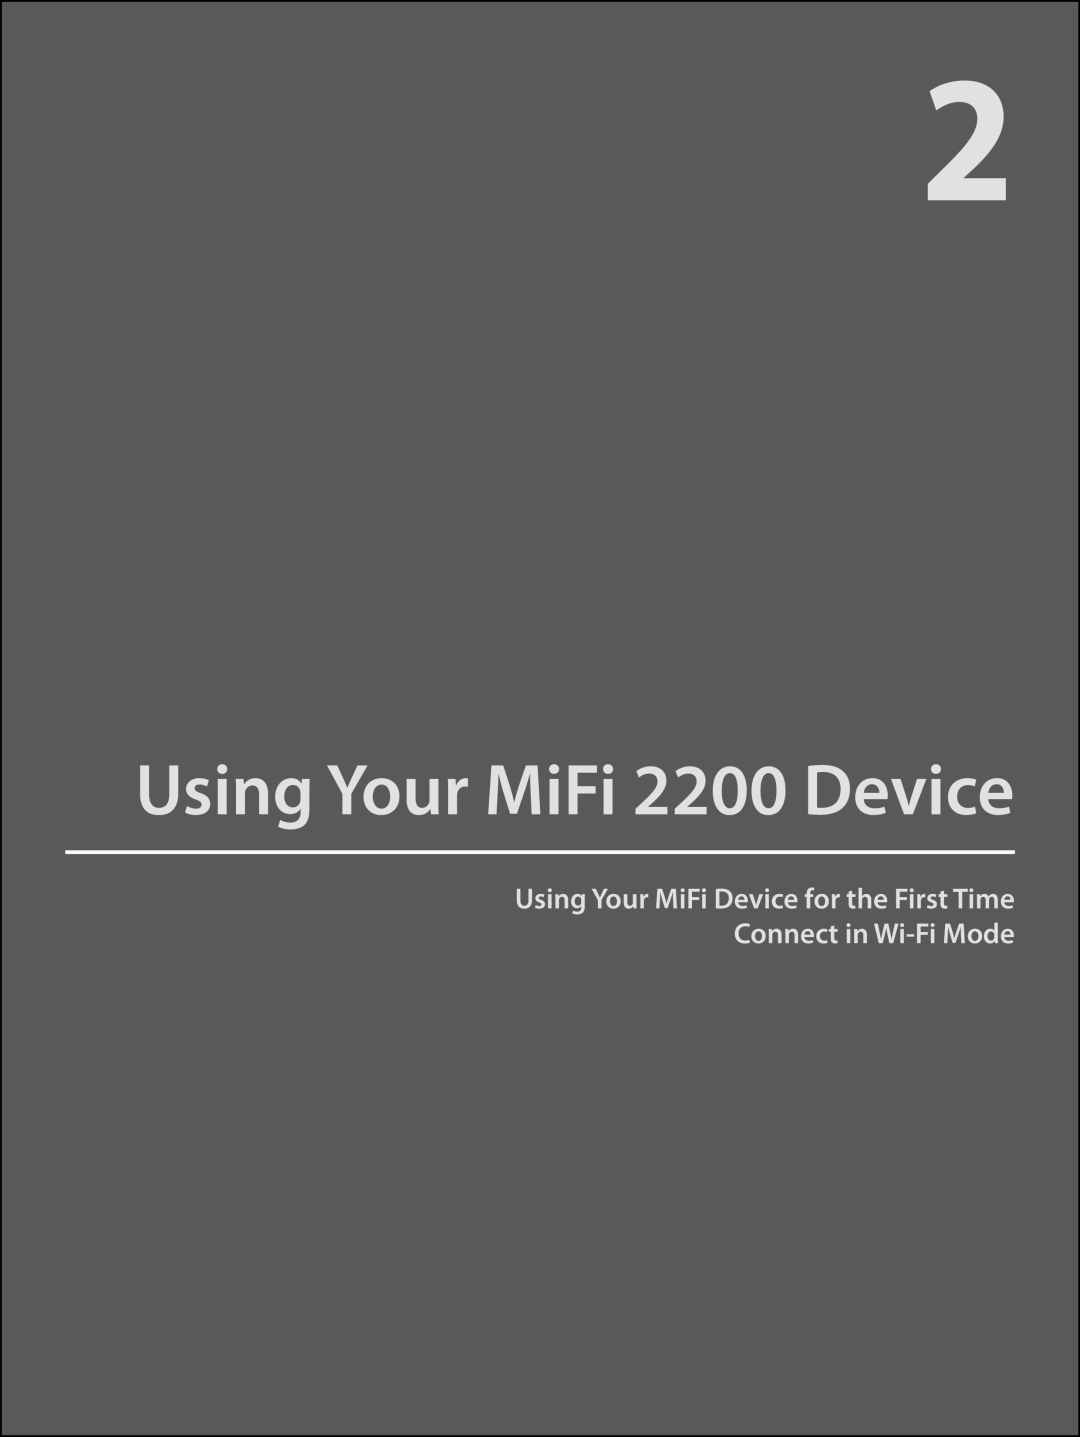 Virgin Mobile manual Using Your MiFi Device for the First Time Connect in Wi-Fi Mode, Using Your MiFi 2200 Device 